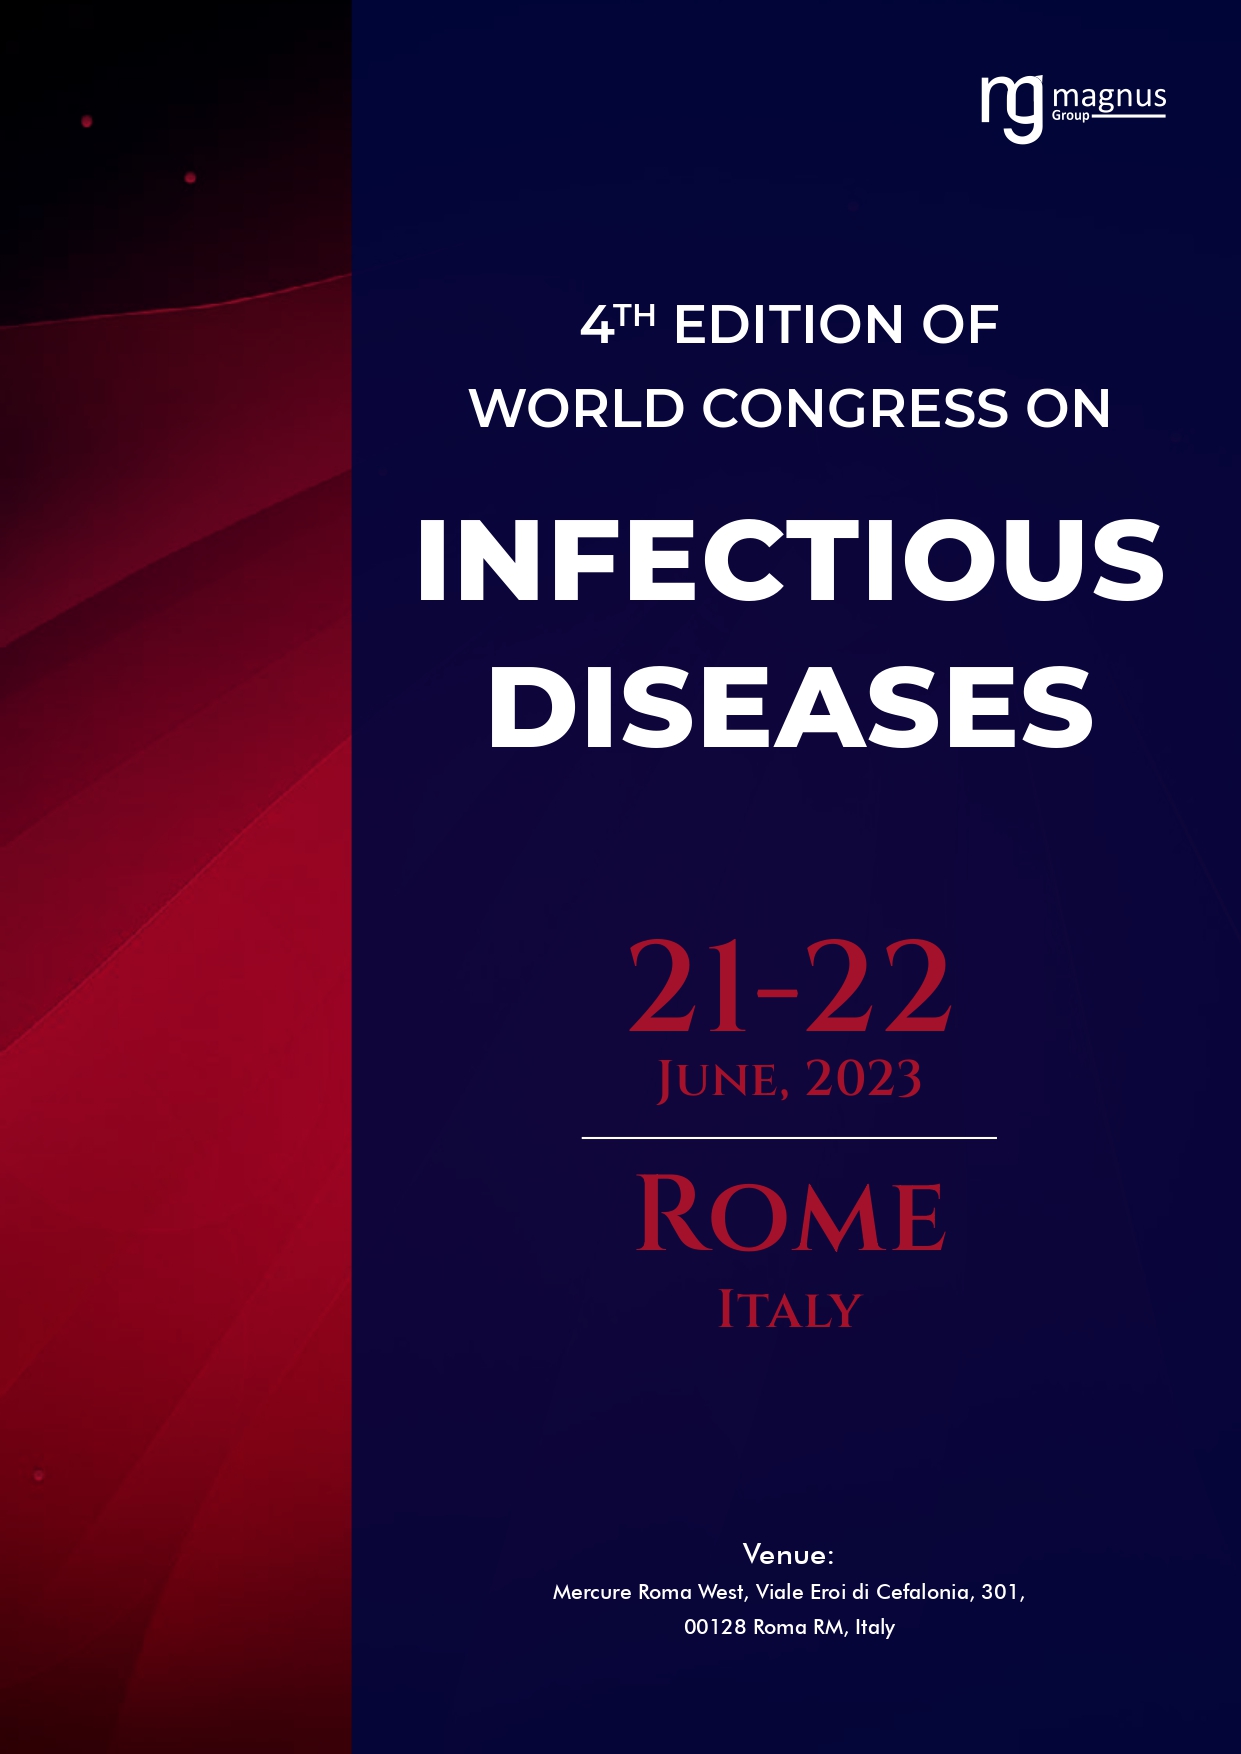 World Congress on Infectious Diseases | Rome, Italy Event Book